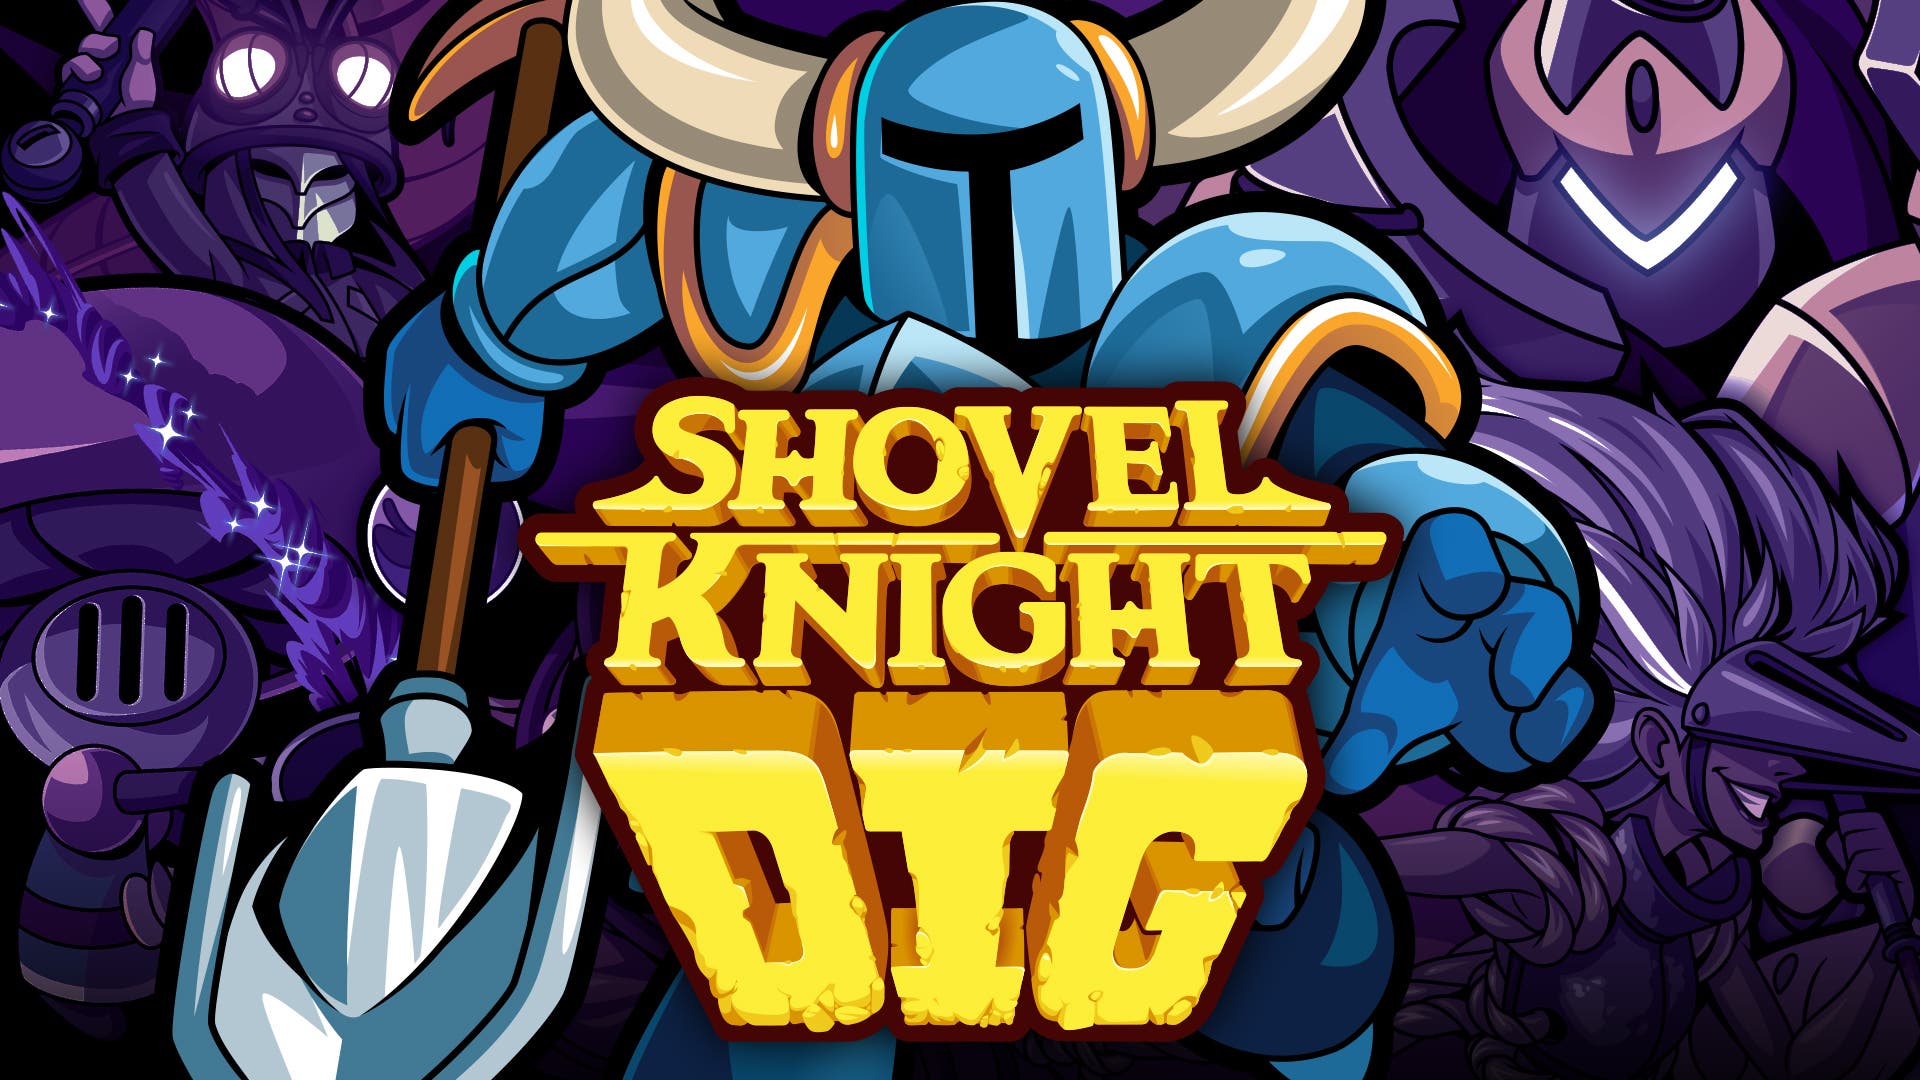 ShovelKnightDig-review_featured